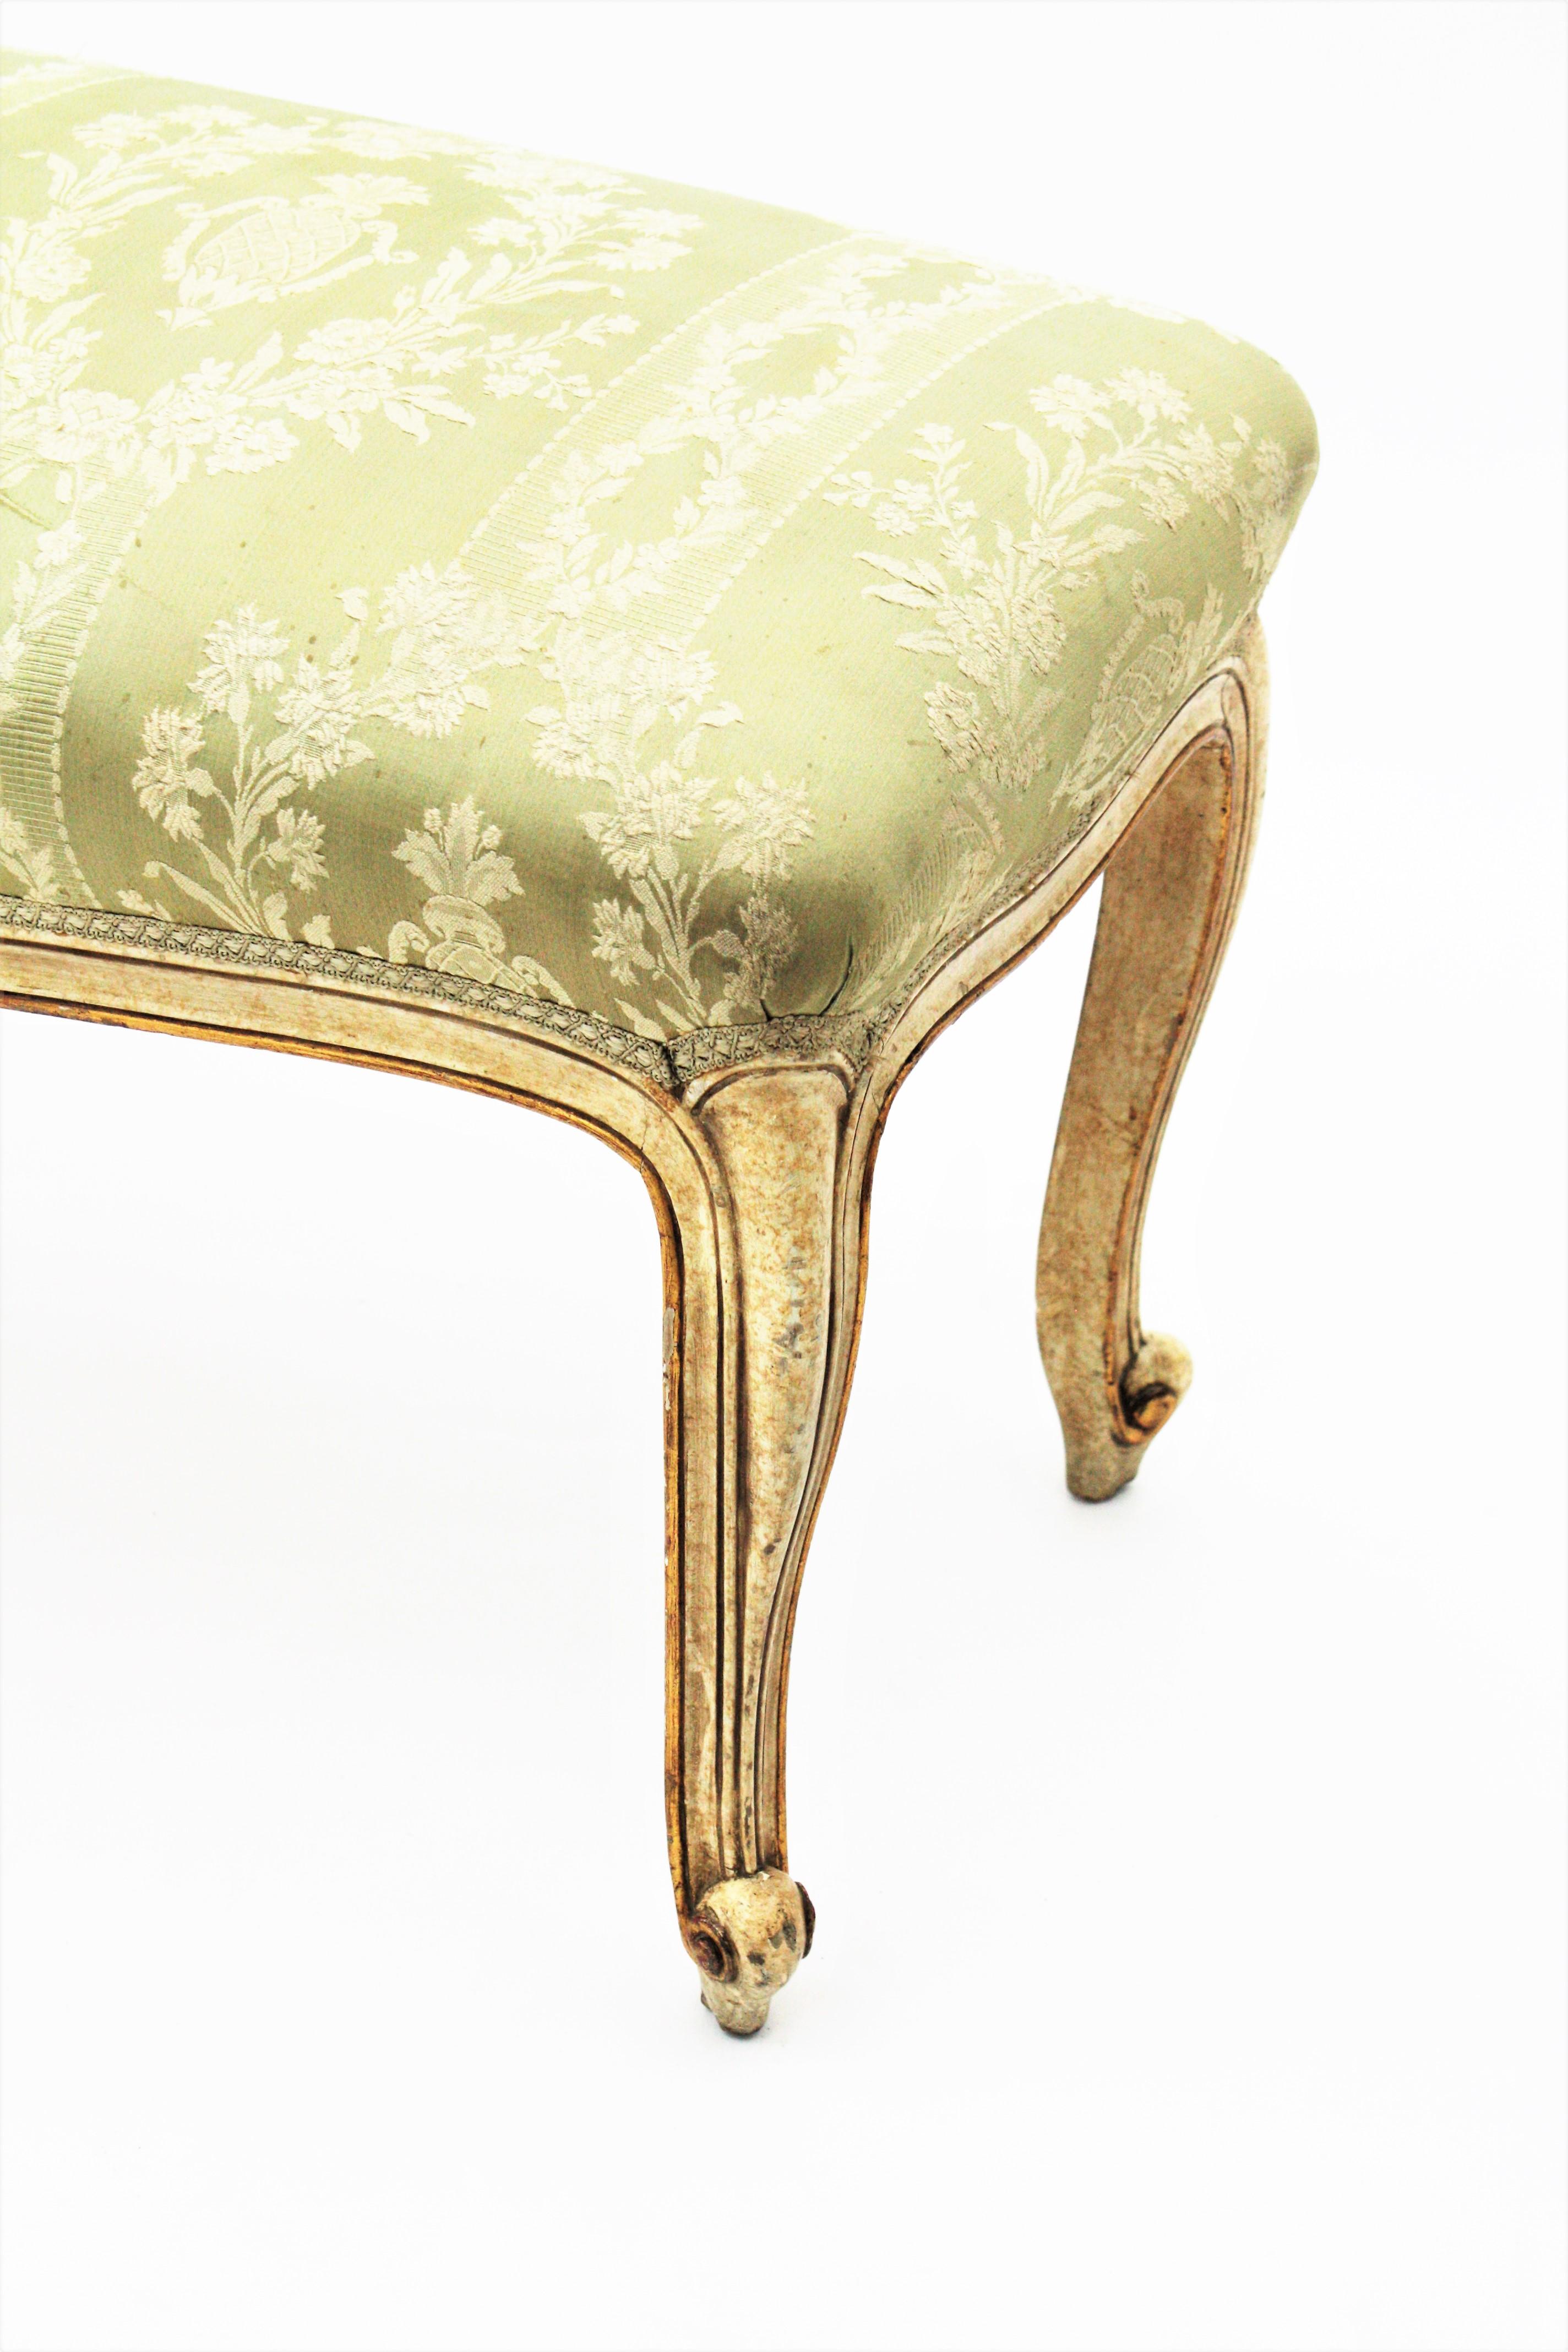 French Louis XV Style Parcel-Gilt Carved Wood Ivory Painted Bench / Stool 13